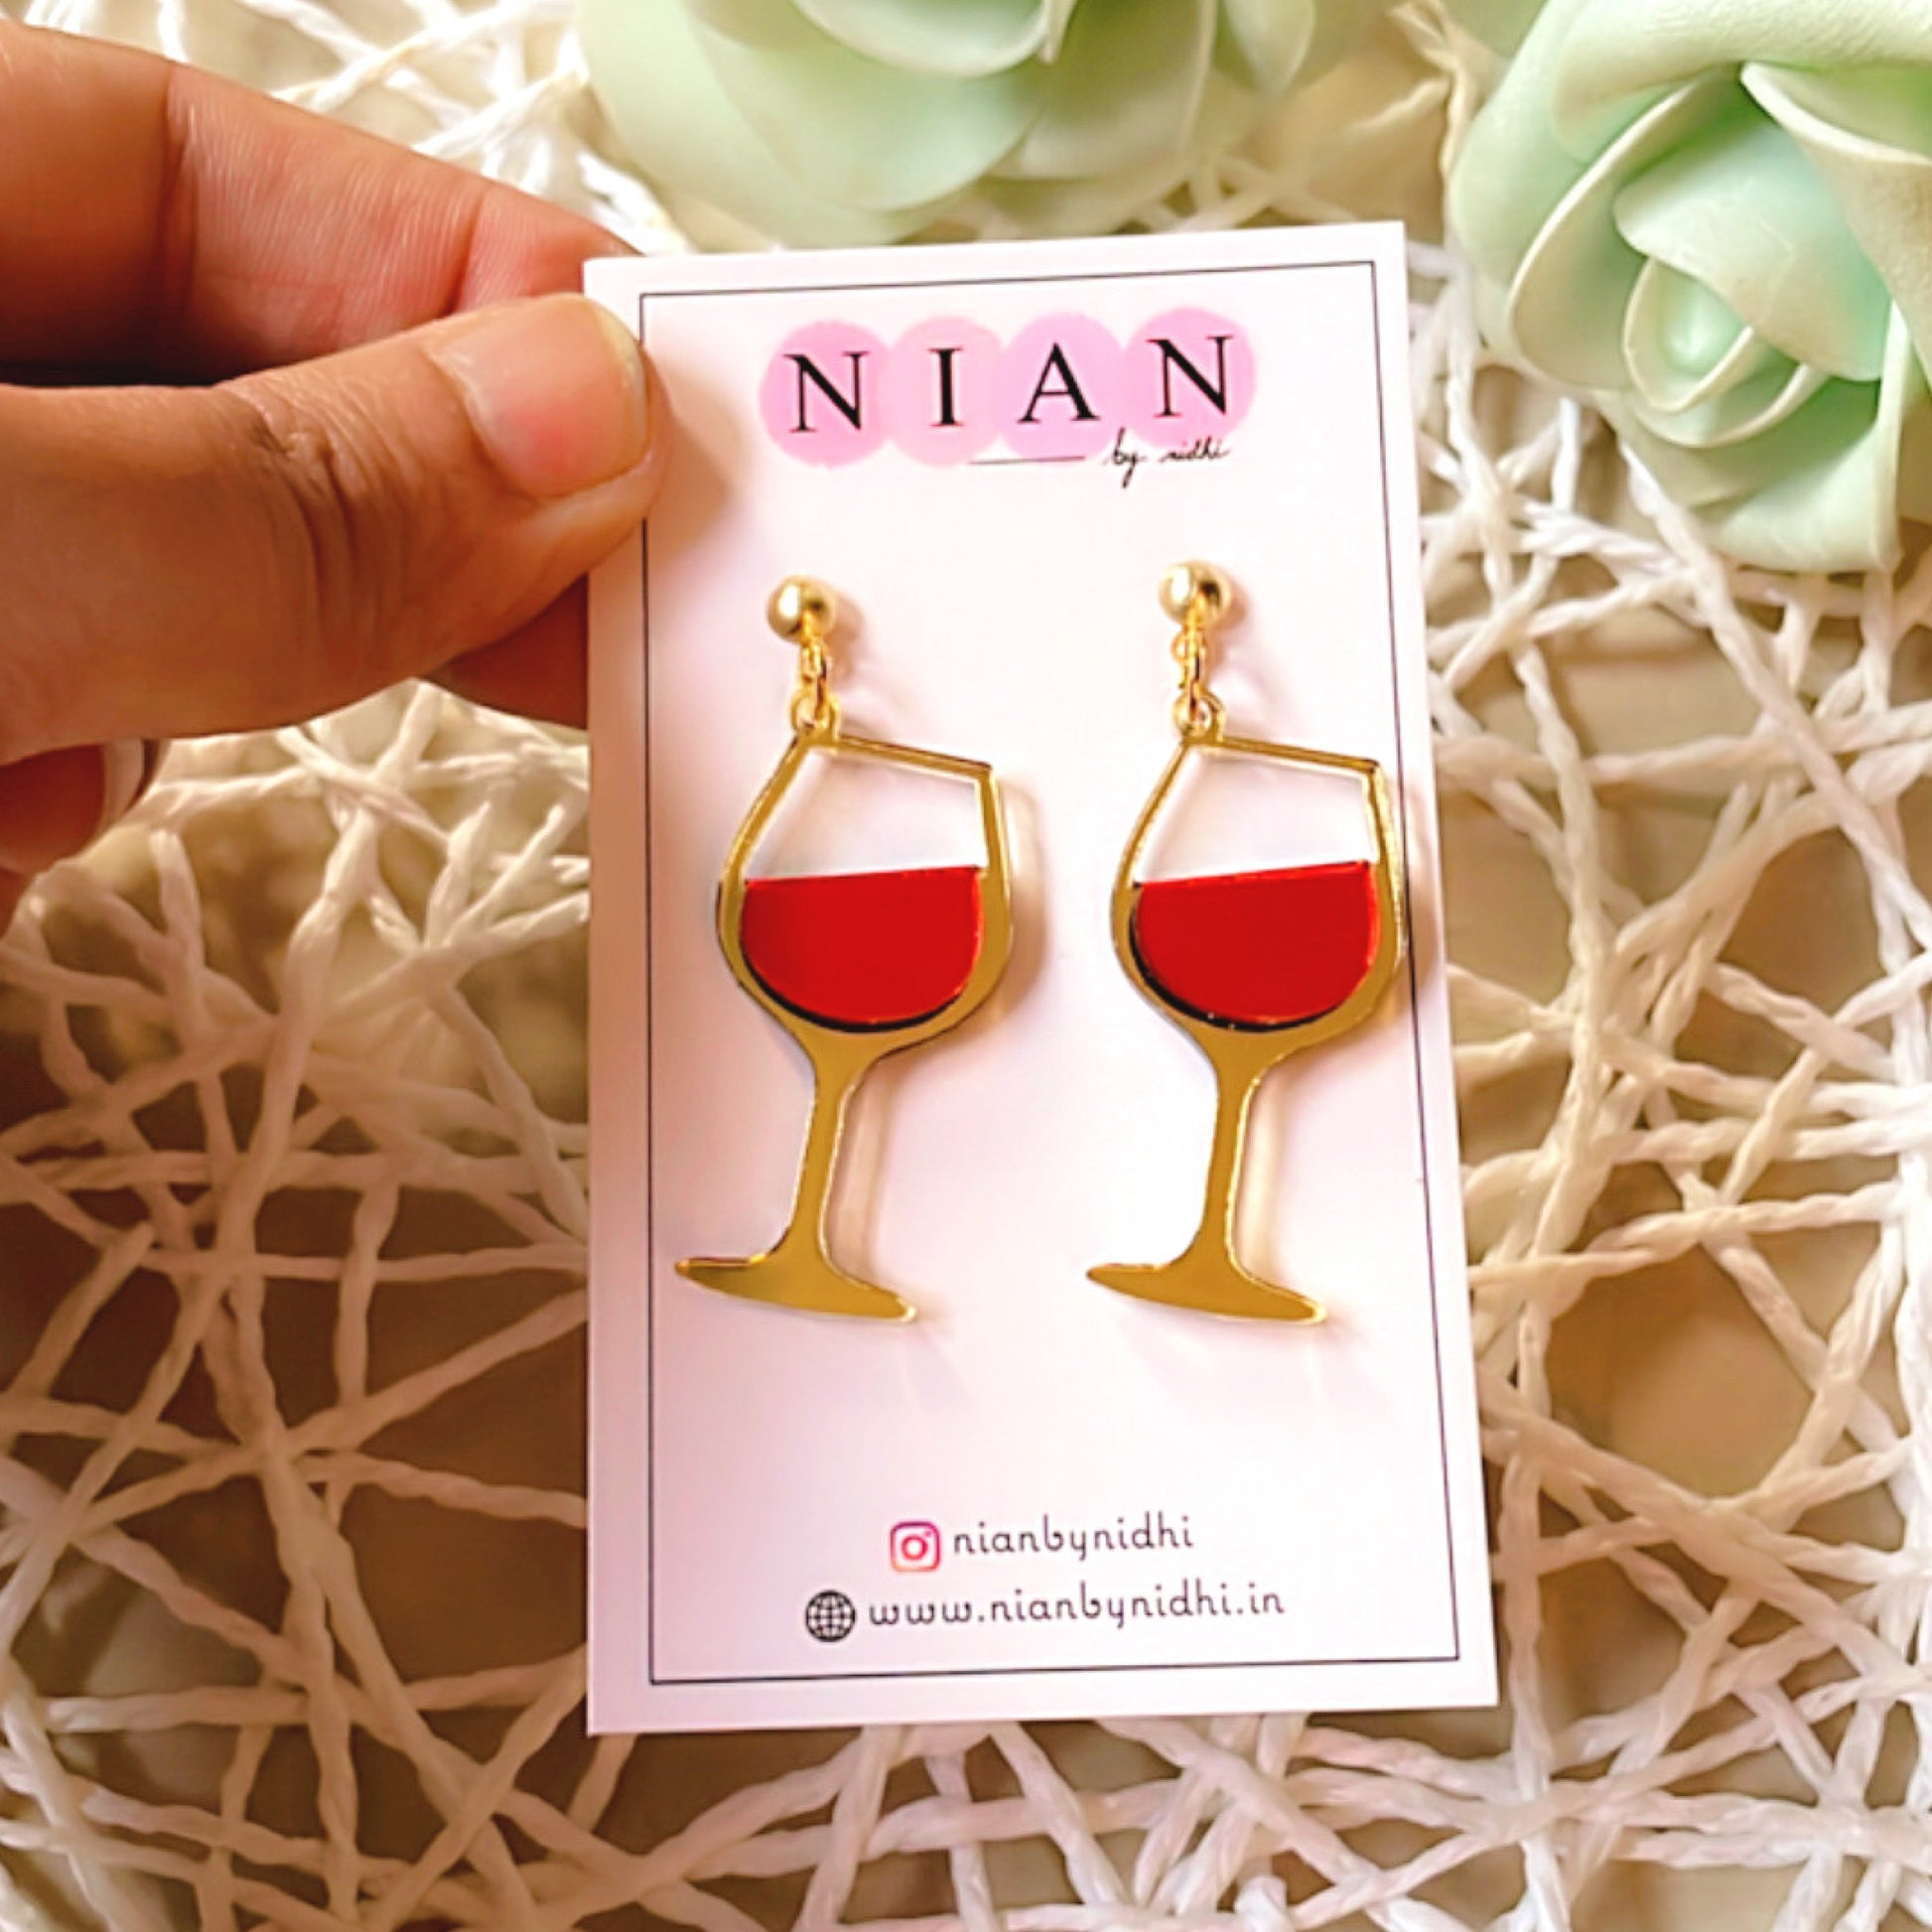 Wine Goblet Earrings - Glossy Red and Golden - Nian by Nidhi - placed in a net basket-y background, held in a hand by a woman